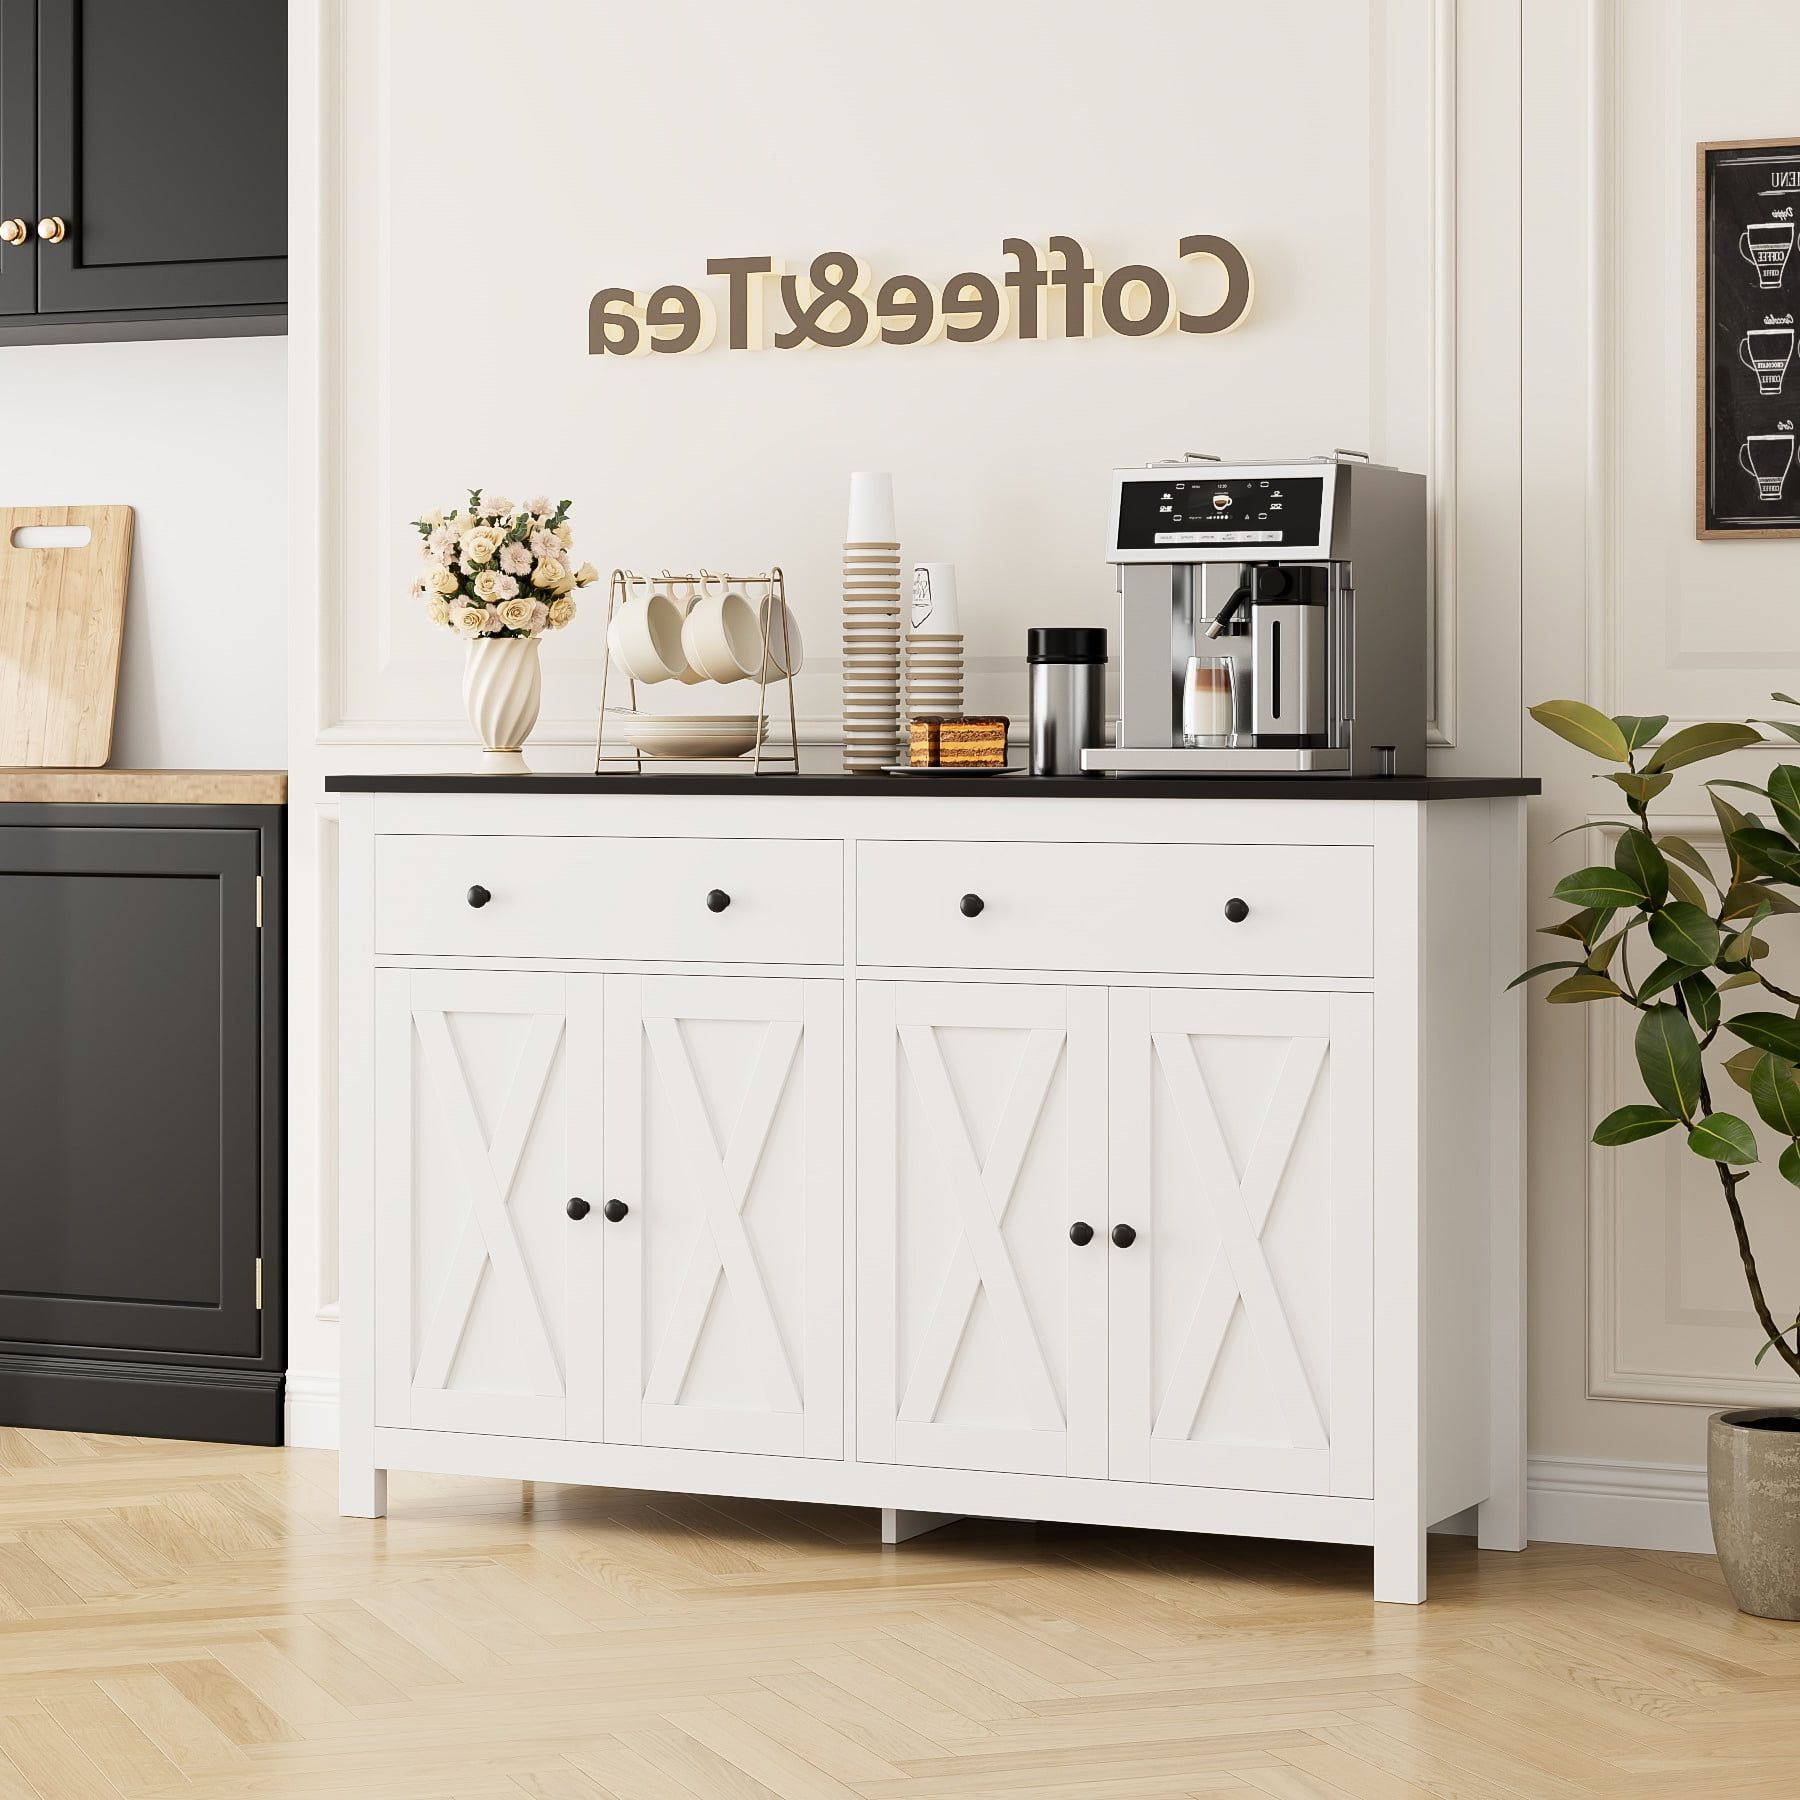 Homfa 4 Doors With 2 Drawers Farmhouse Storage Cabinet, Wood Kitchen  Sideboard With Adjustable Shelves, White Black – Walmart With Regard To Sideboards With Adjustable Shelves (View 4 of 20)